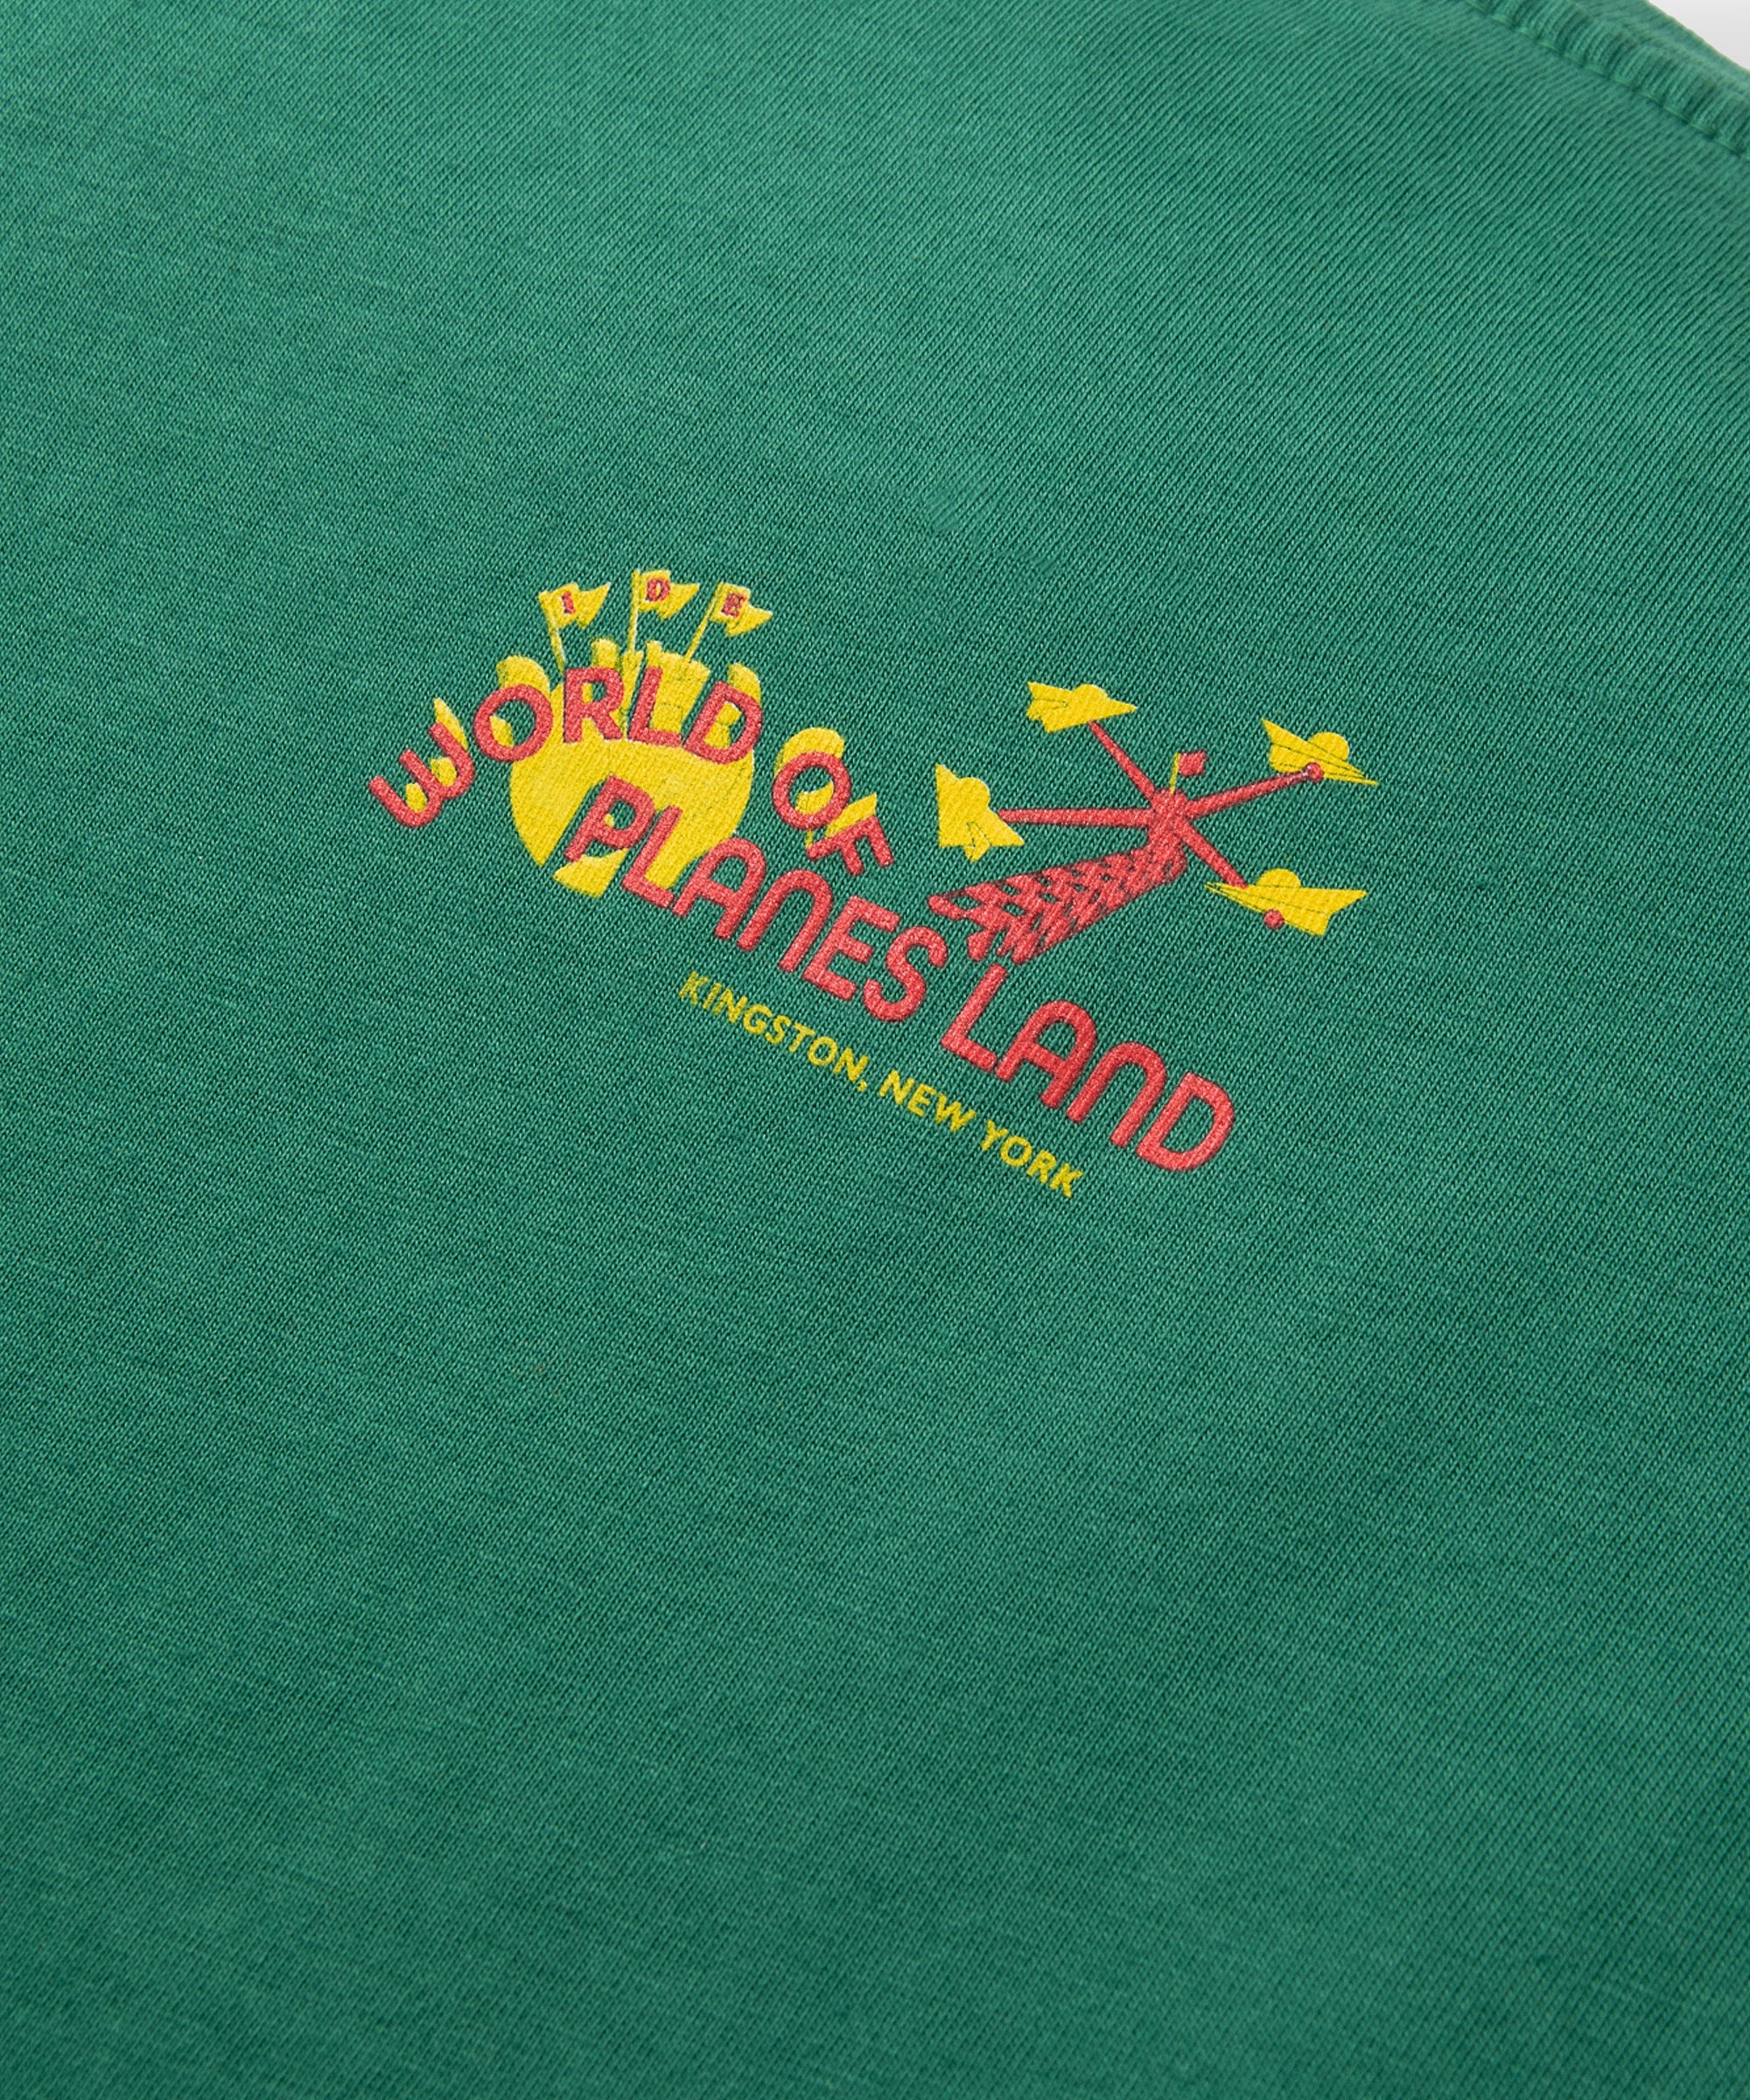 PAPER PLANES "WELCOME TO PLANESLAND" TEE